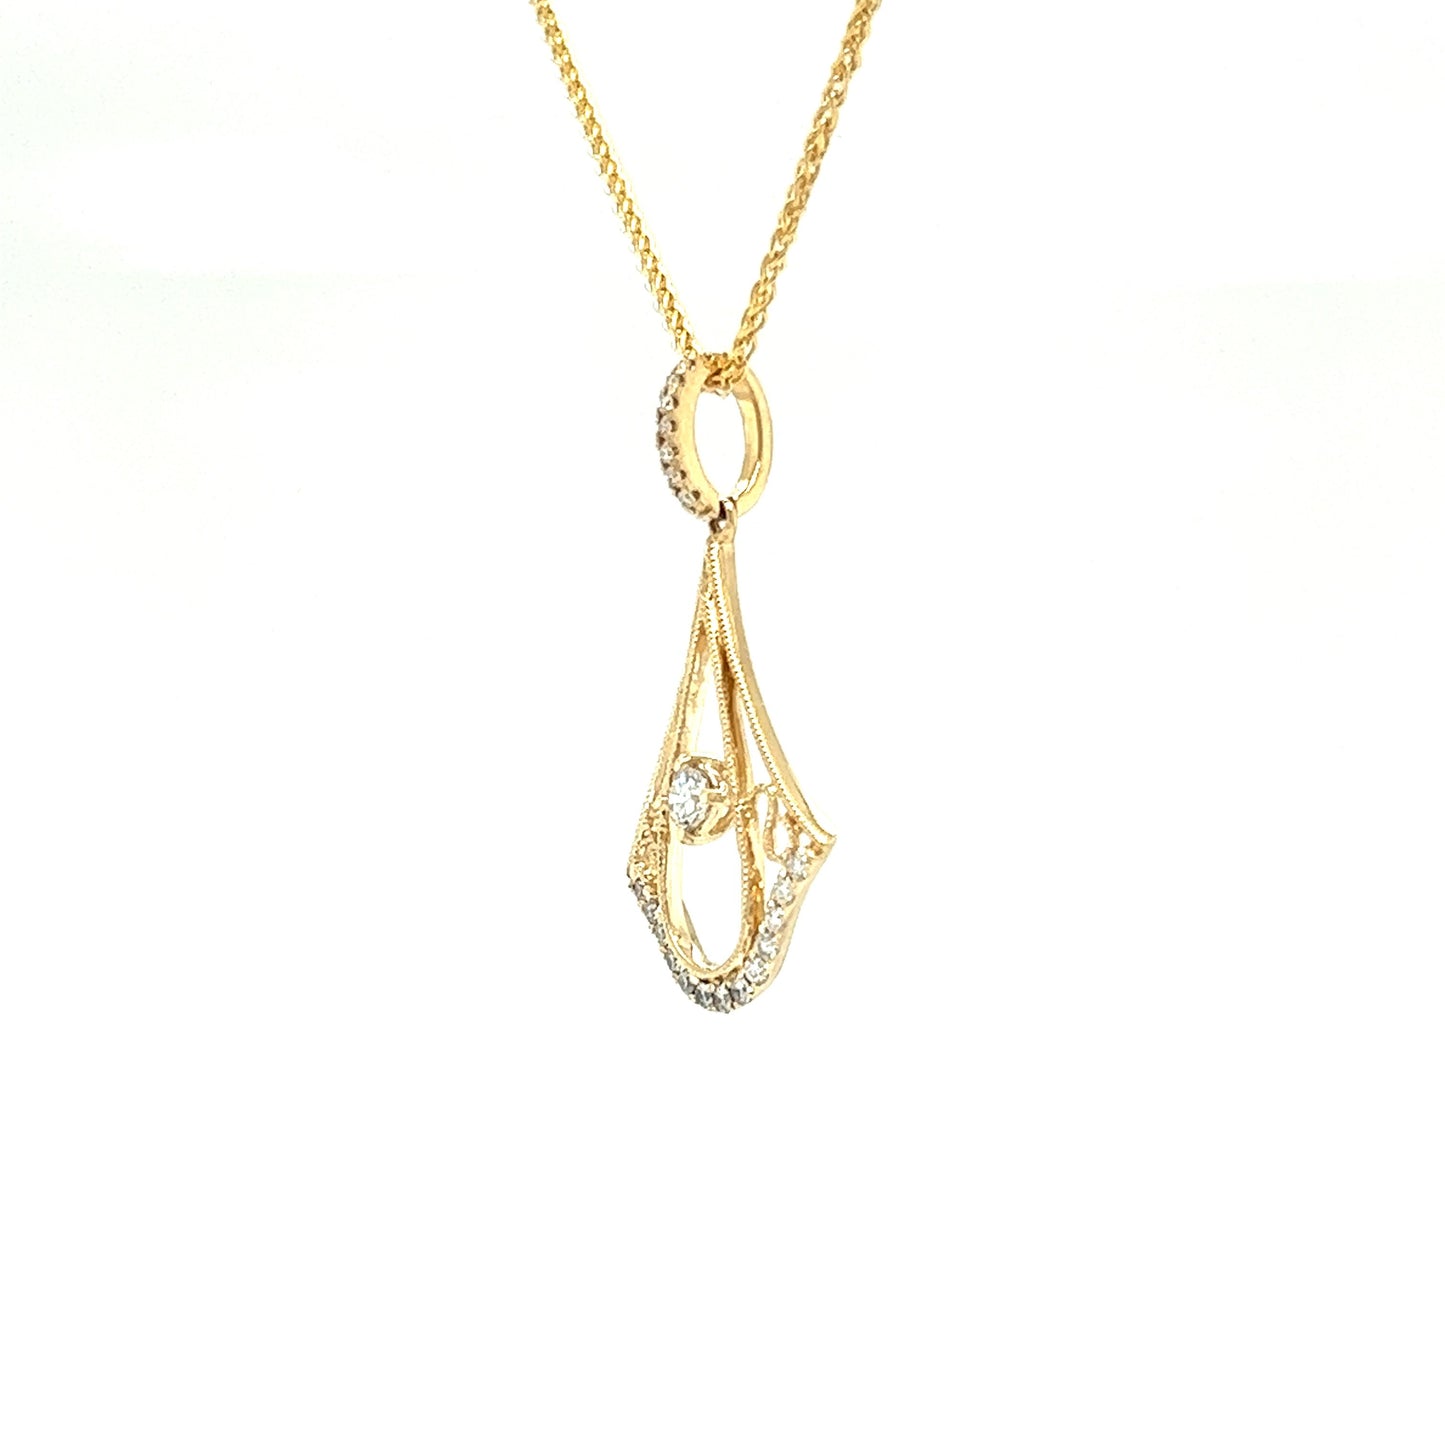 Fancy Pendulum Drop Pendant with 0.35ctw of Diamonds in 14K Yellow Gold Right Side View